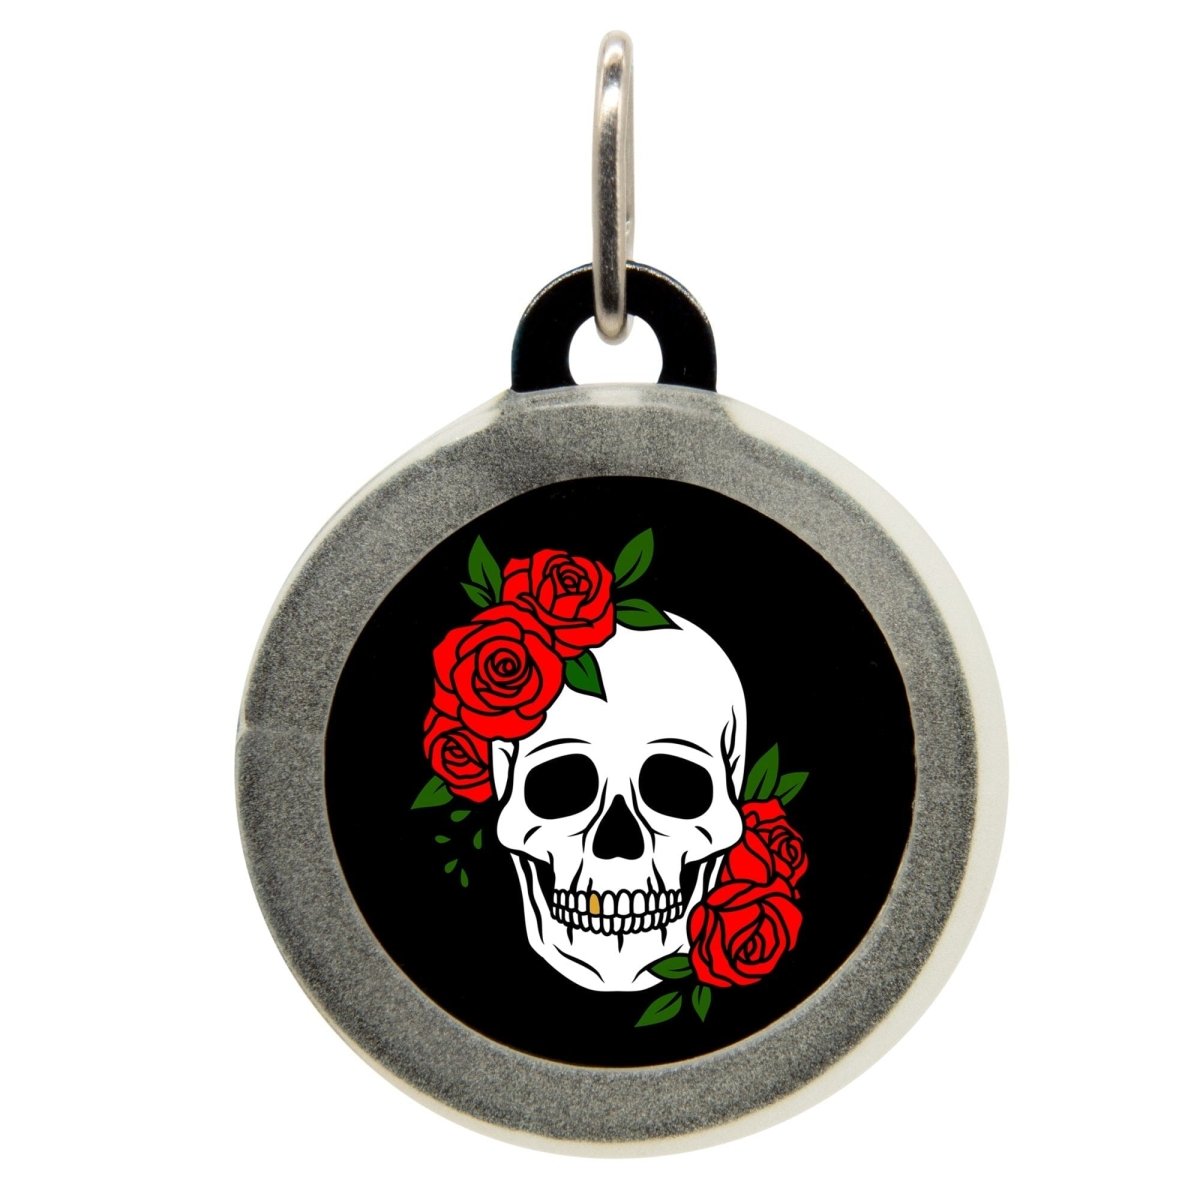 Skull and Roses Name Tag - Oh My Paw'd